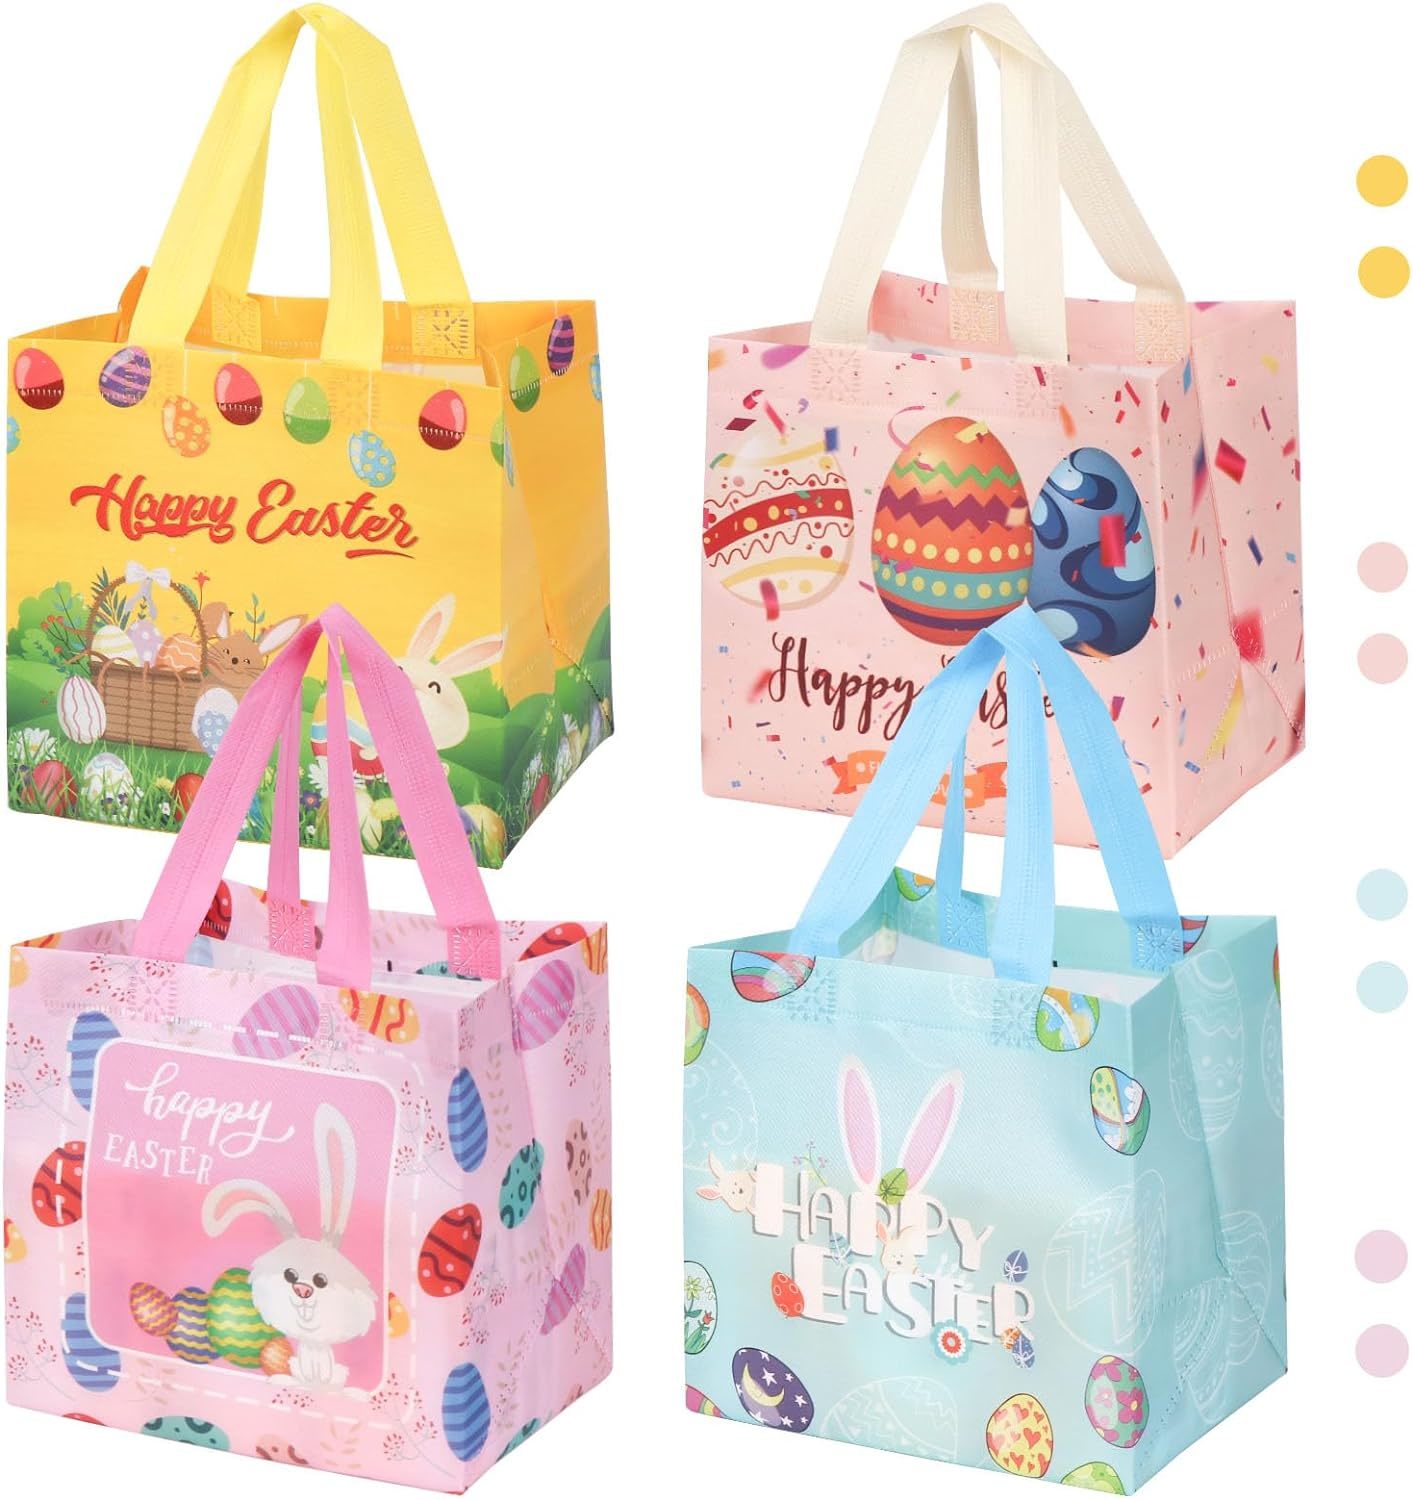 Easter Gift Bags 8PCS Easter Non Woven Bags with Handles Happy Easter Egg Hunt B - $37.66